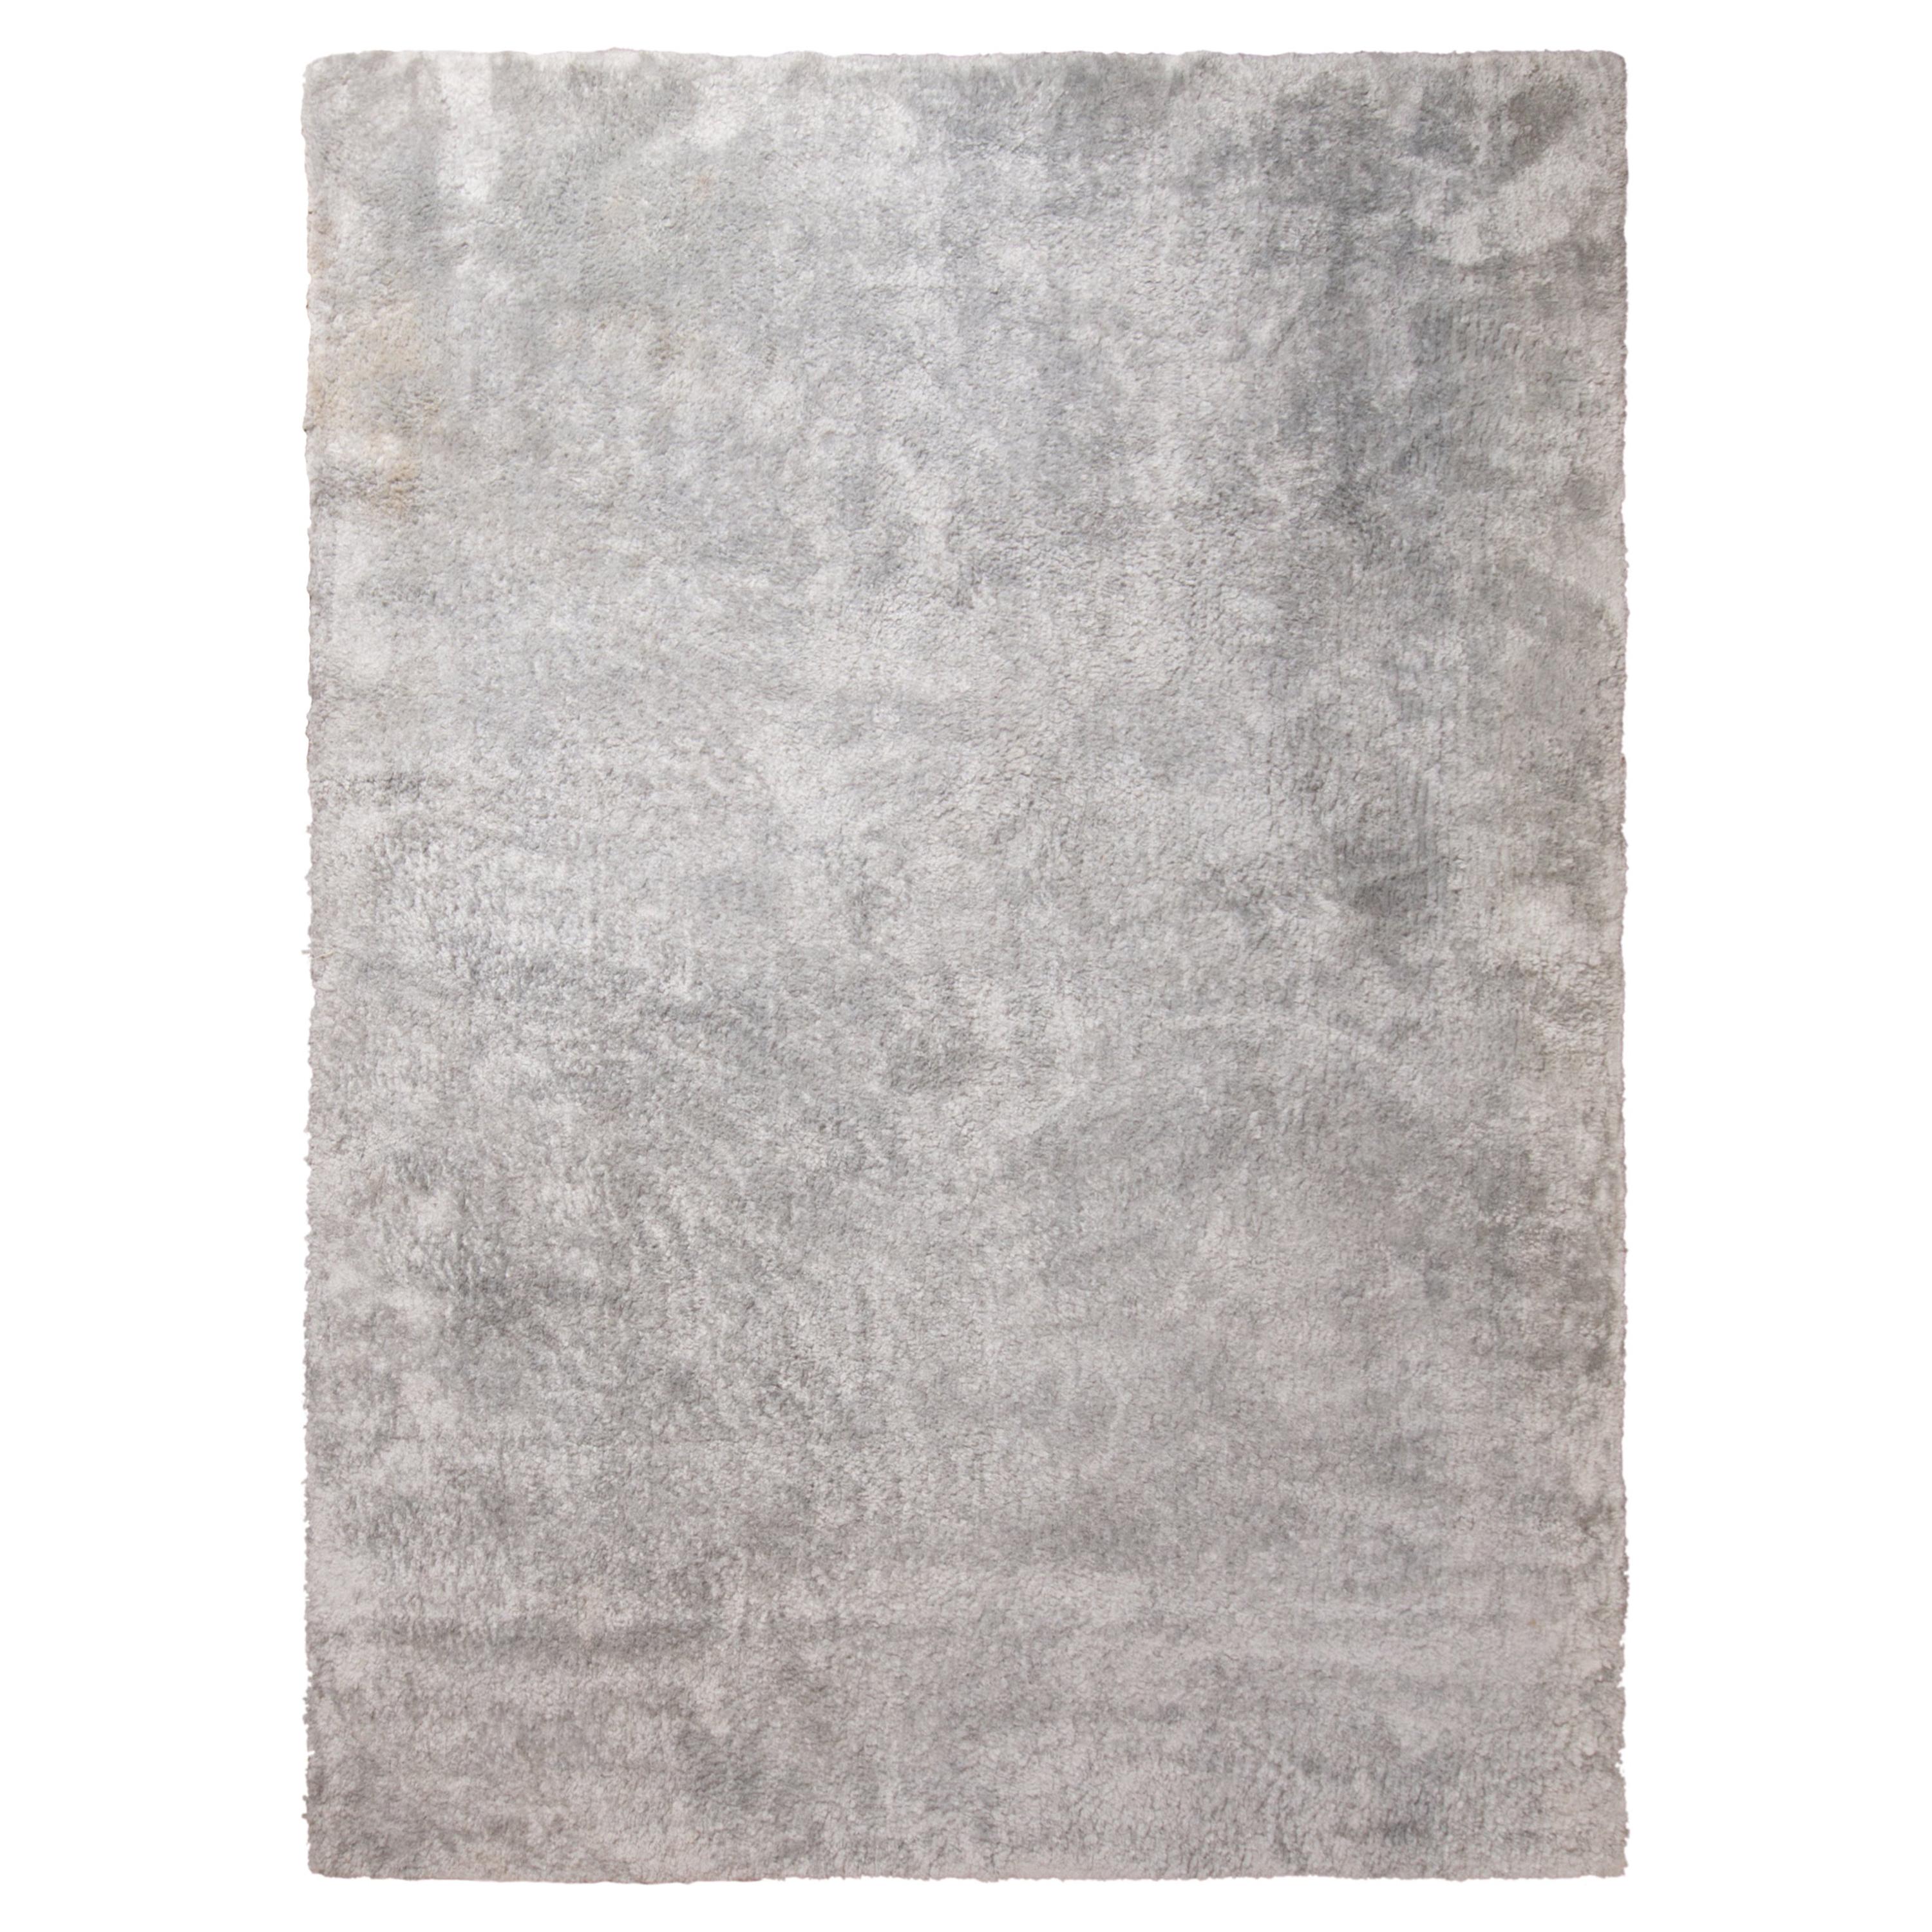 Rug & Kilim’s Textural Plain Rug in Gray/Silver Two Tones, High Pile For Sale